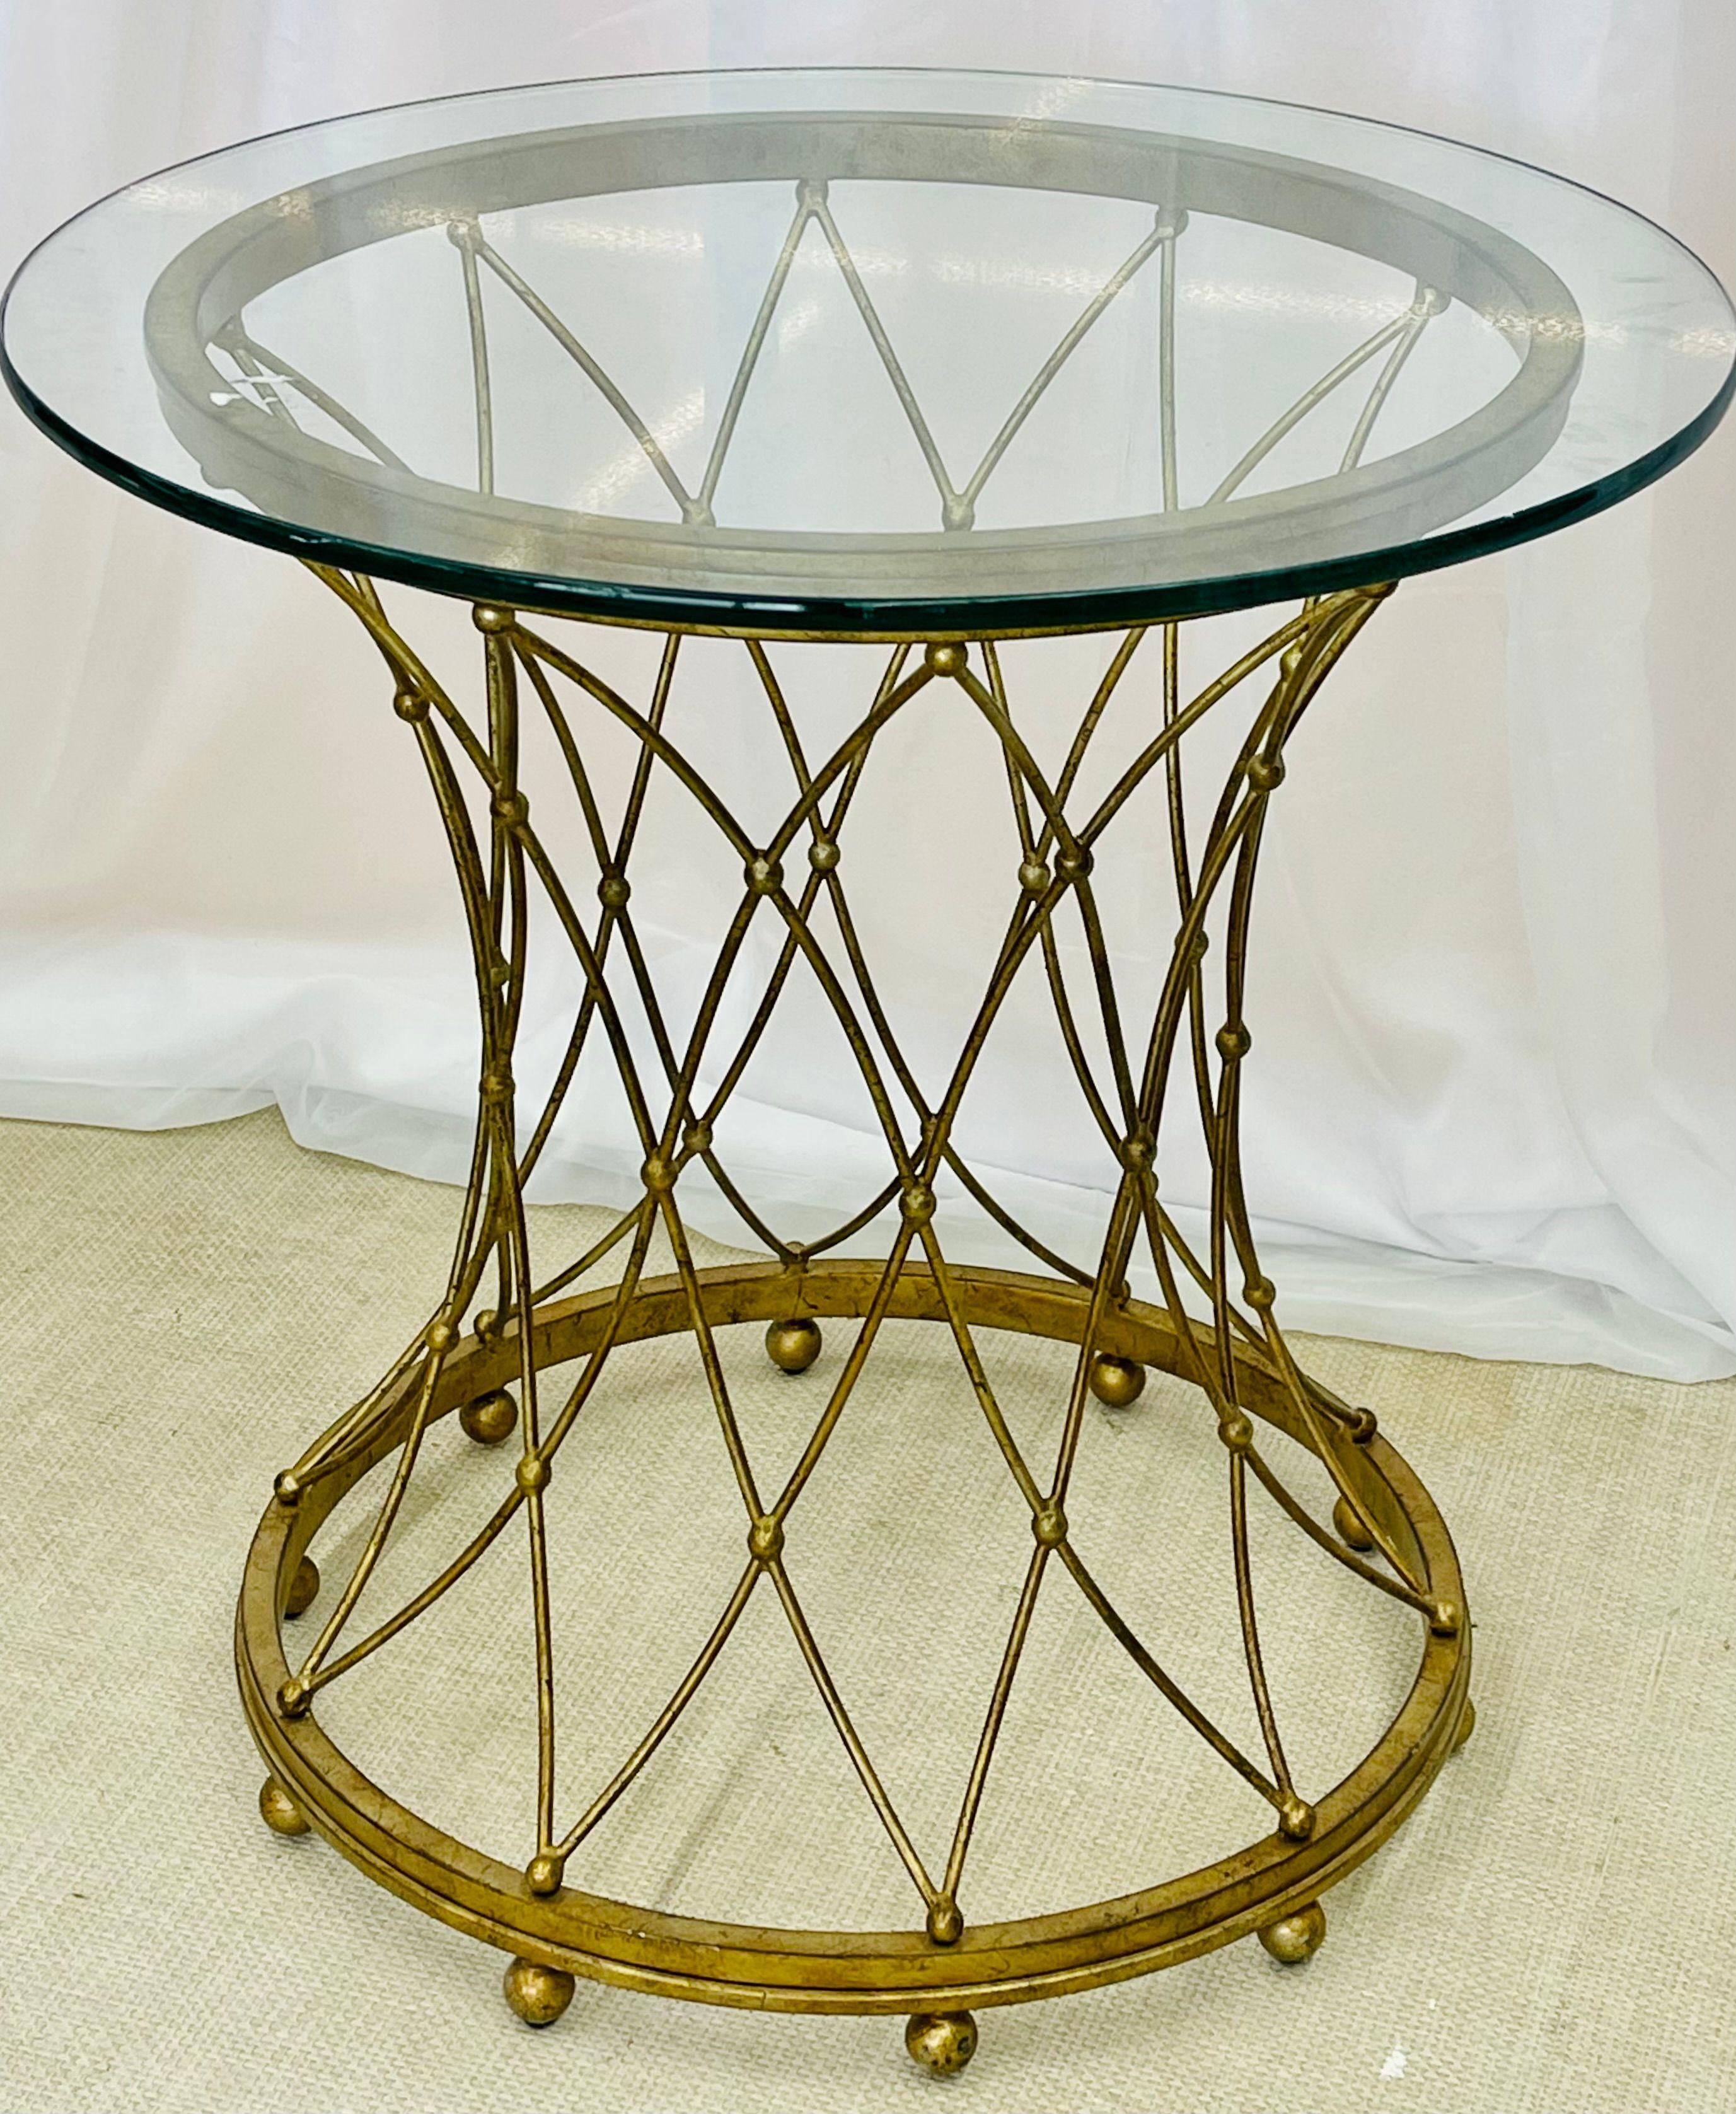 Hollywood Regency Neoclassical, Maison Jansen Style Round Gilt Metal Coffee Table, Side Table For Sale